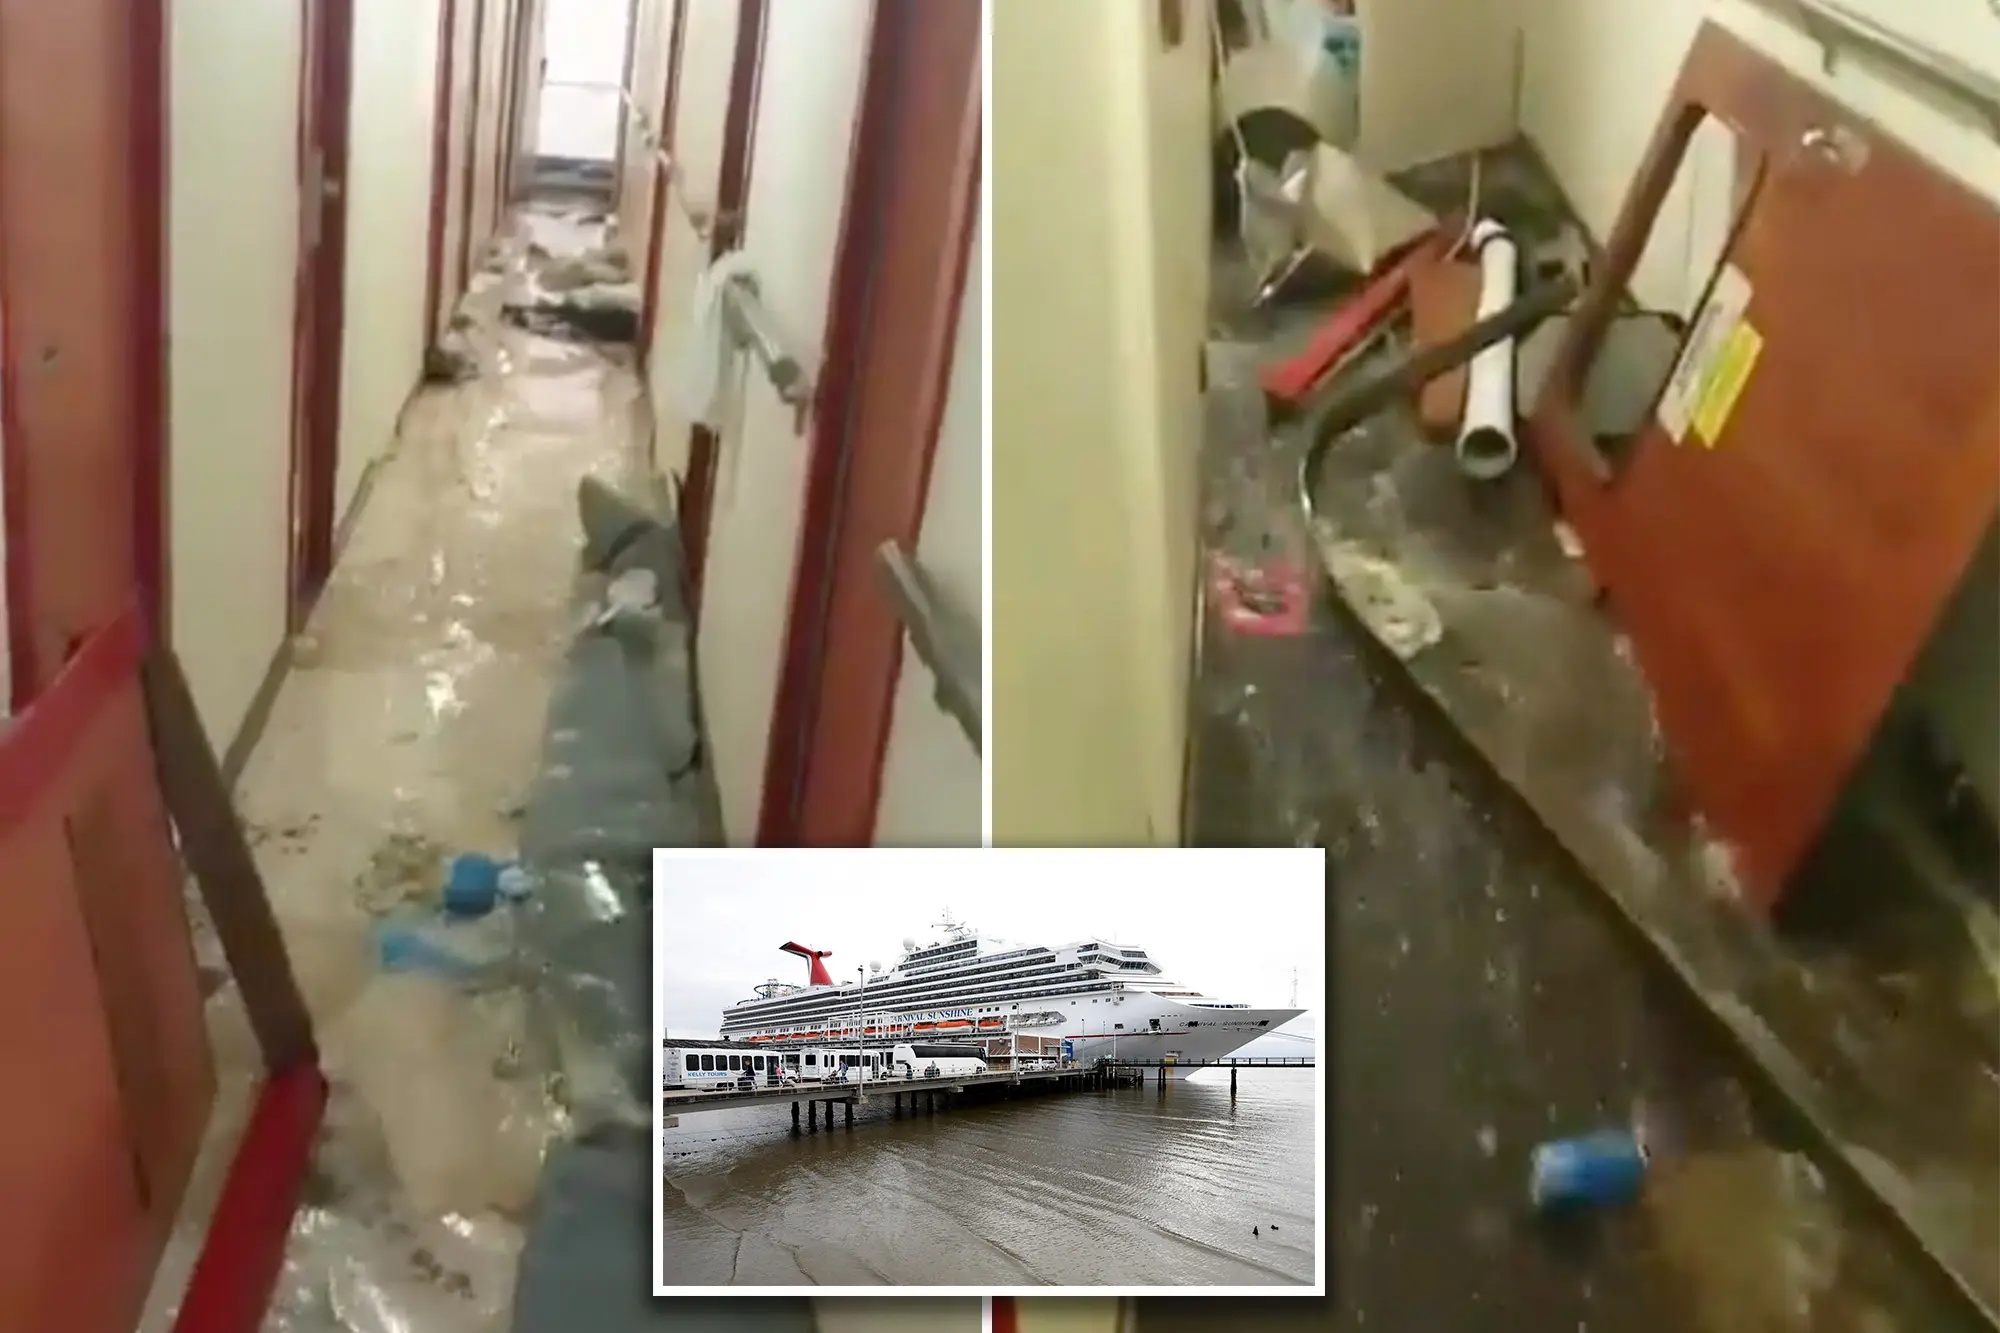 Carnival cruise ship storm video sparks fear online [Watch]